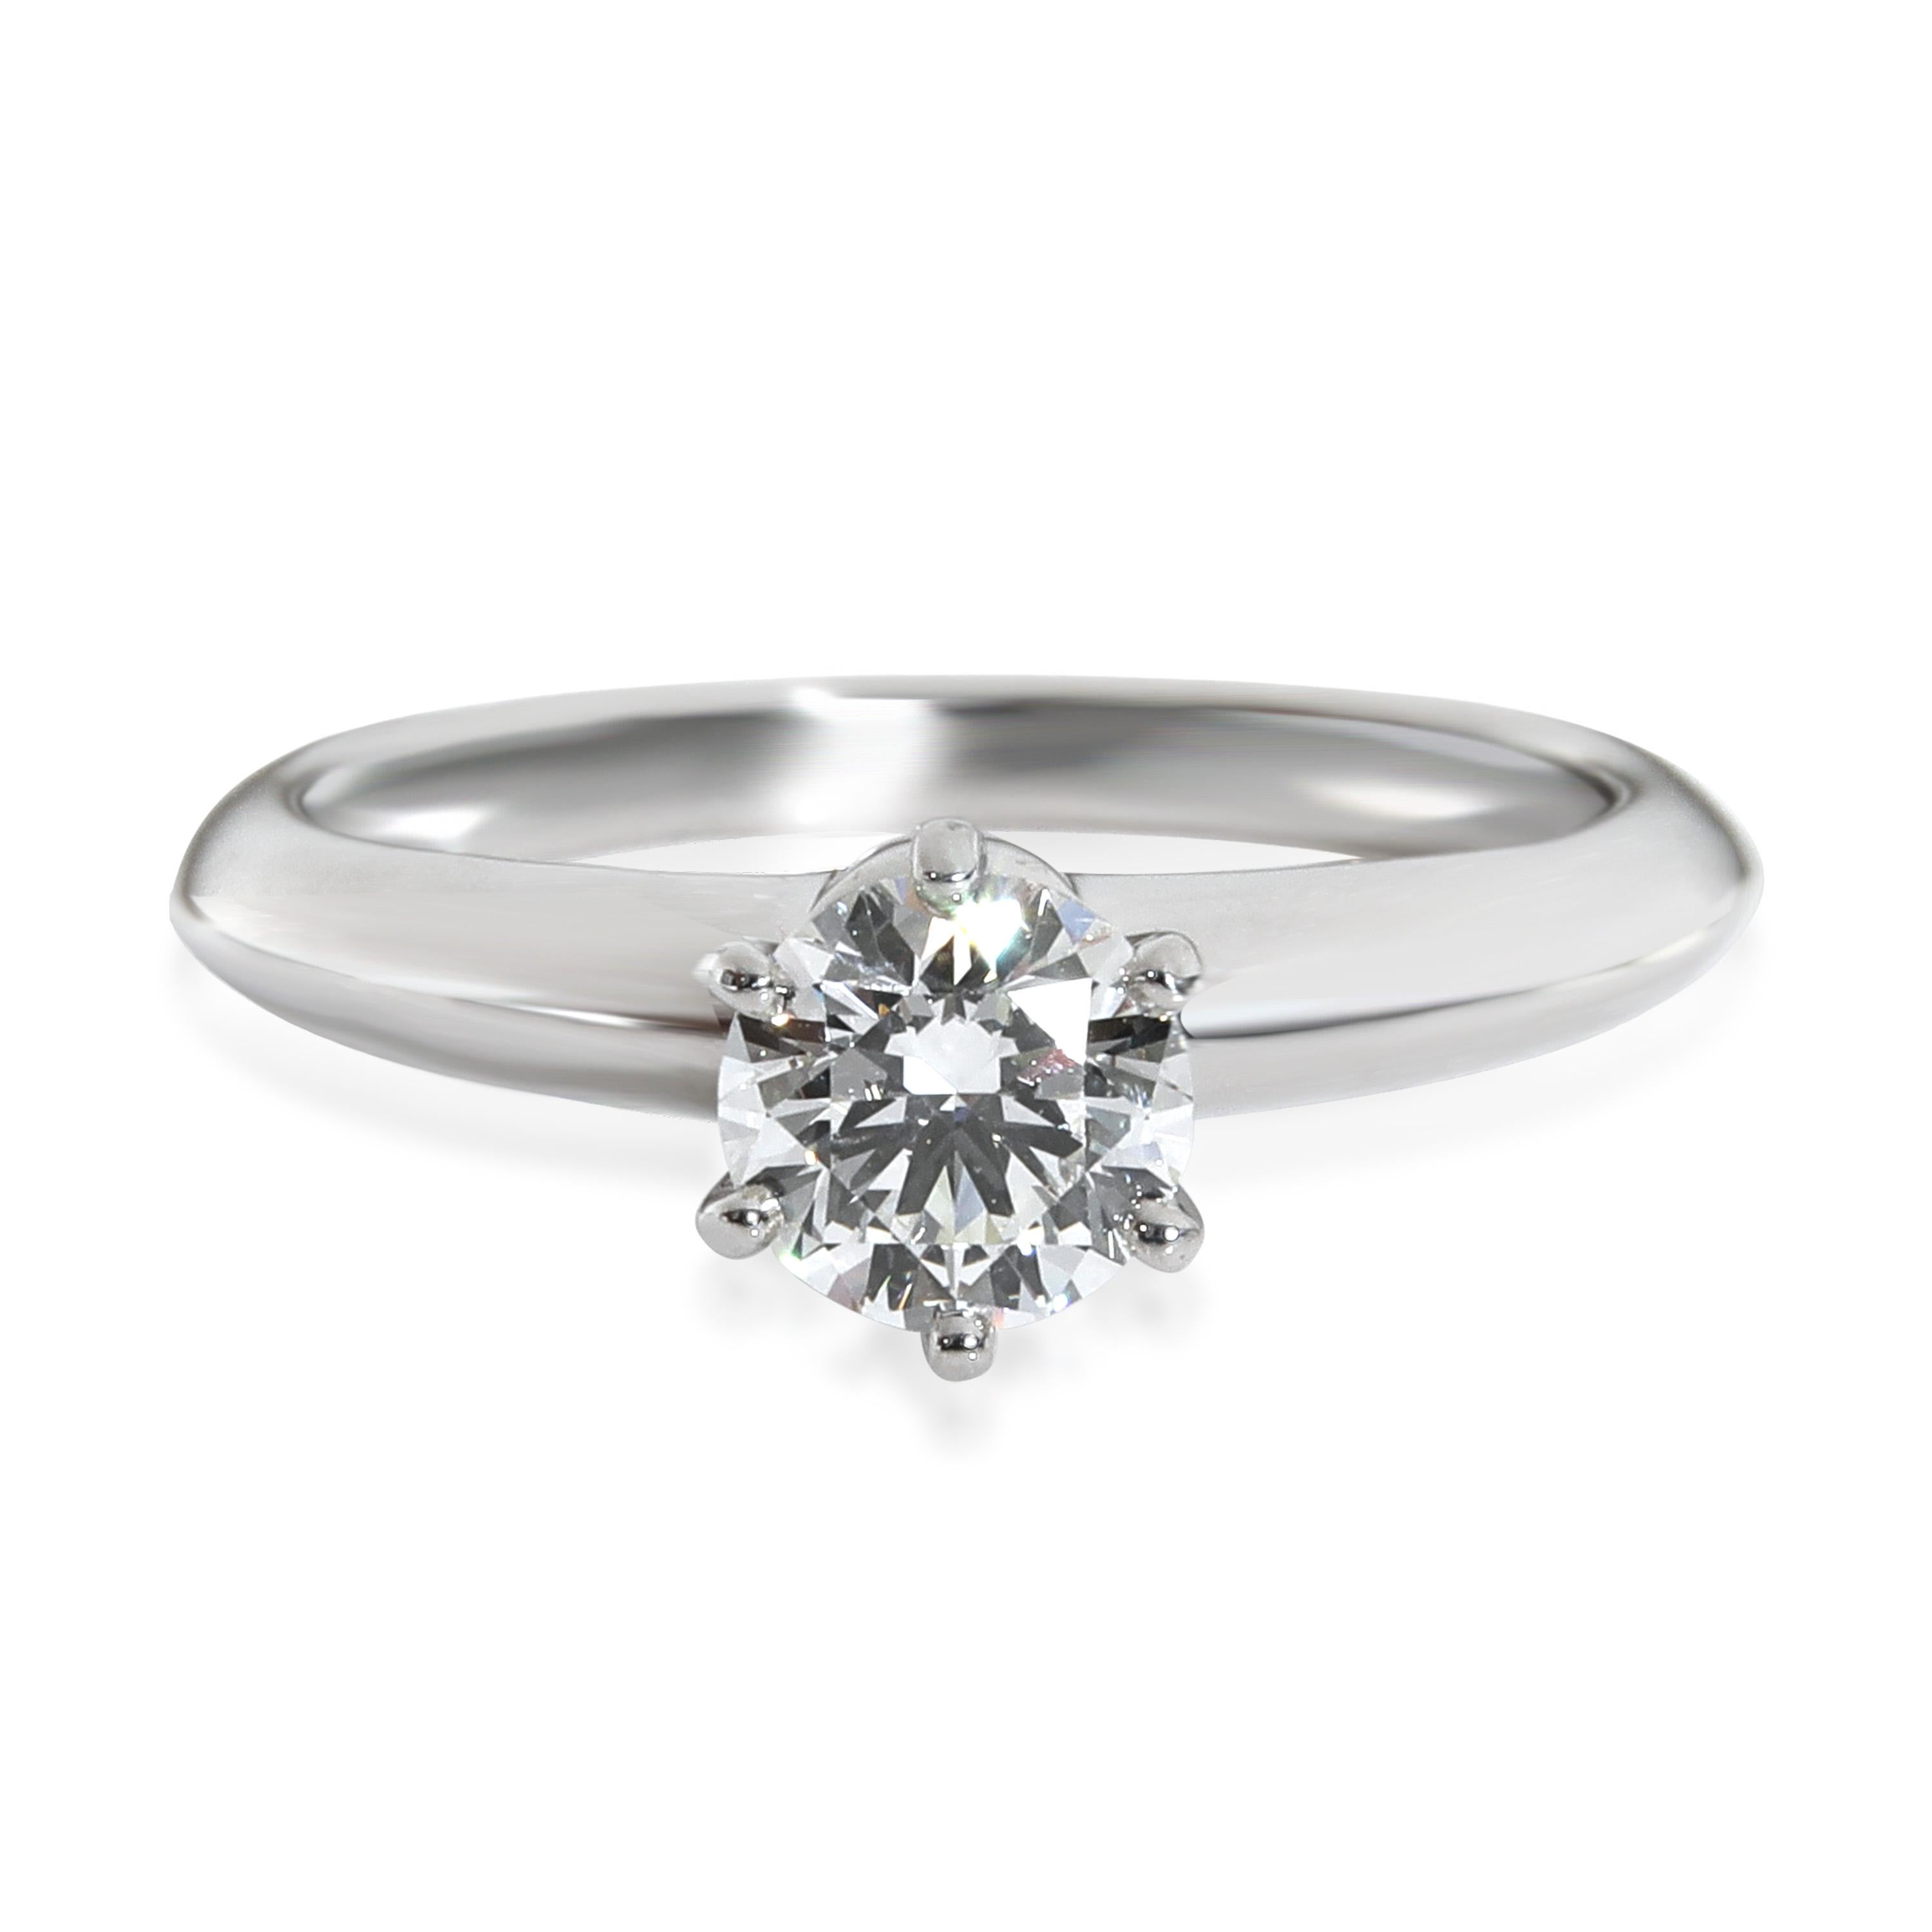 Tiffany & Co. Diamond Solitaire Engagement Ring in Platinum I VS2 0.62 CTW

PRIMARY DETAILS
SKU: 130114
Listing Title: Tiffany & Co. Diamond Solitaire Engagement Ring in Platinum I VS2 0.62 CTW
Condition Description: Tiffany reinvents a classic with